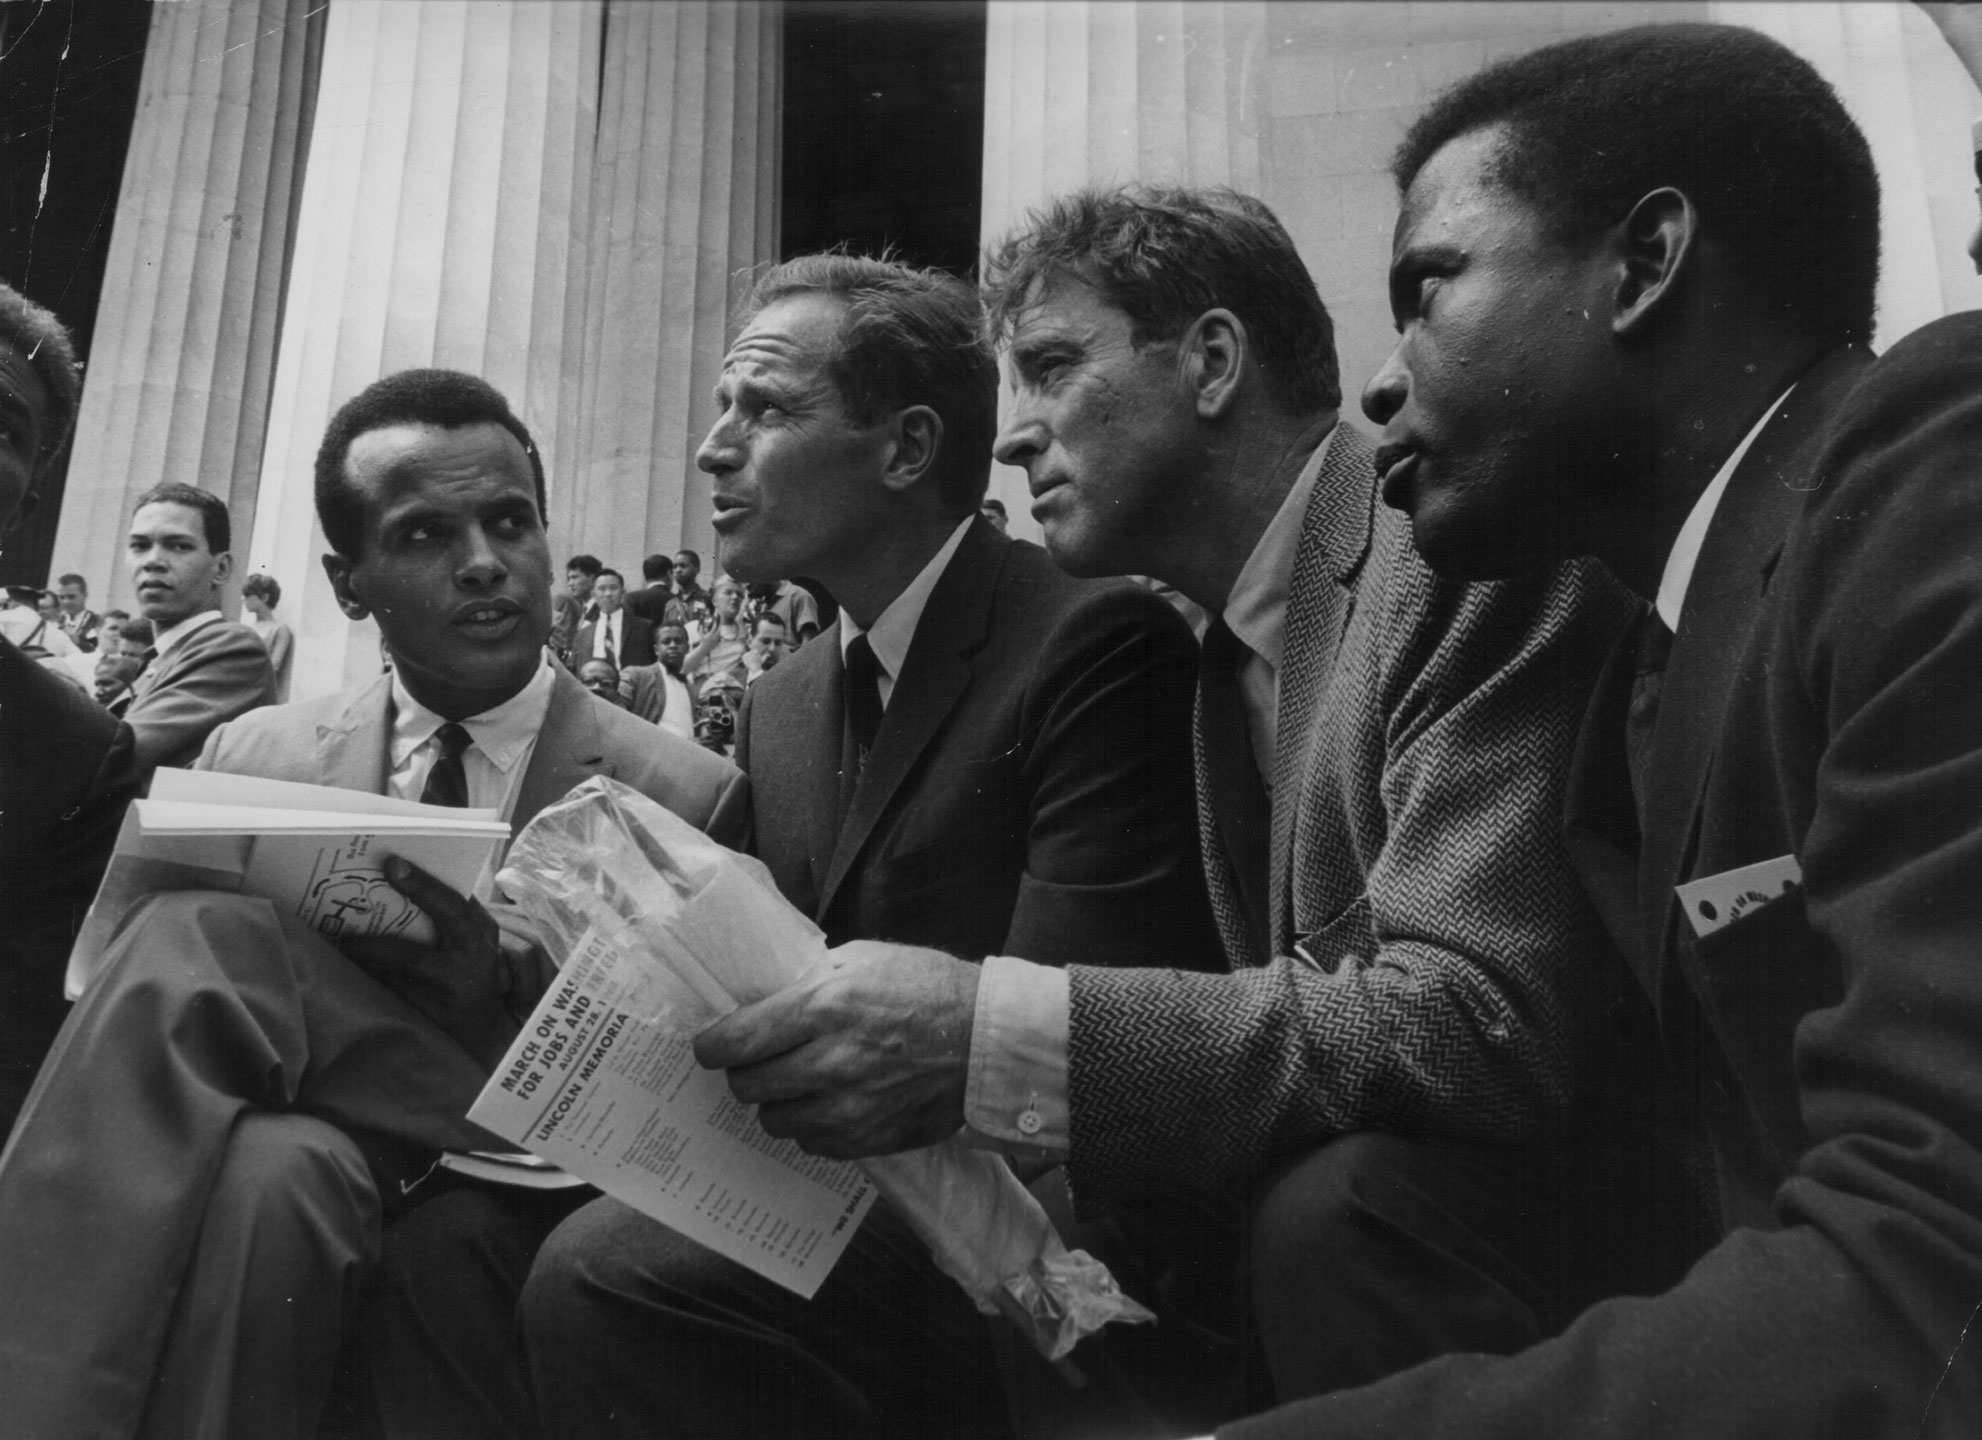 Actors Harry Belafonte, Charlton Heston, Burt Lancaster and Sidney Poitier attending the March on Washington for Jobs and Freedom, a huge civil rights rally in Washington D C, August 28th 1963.